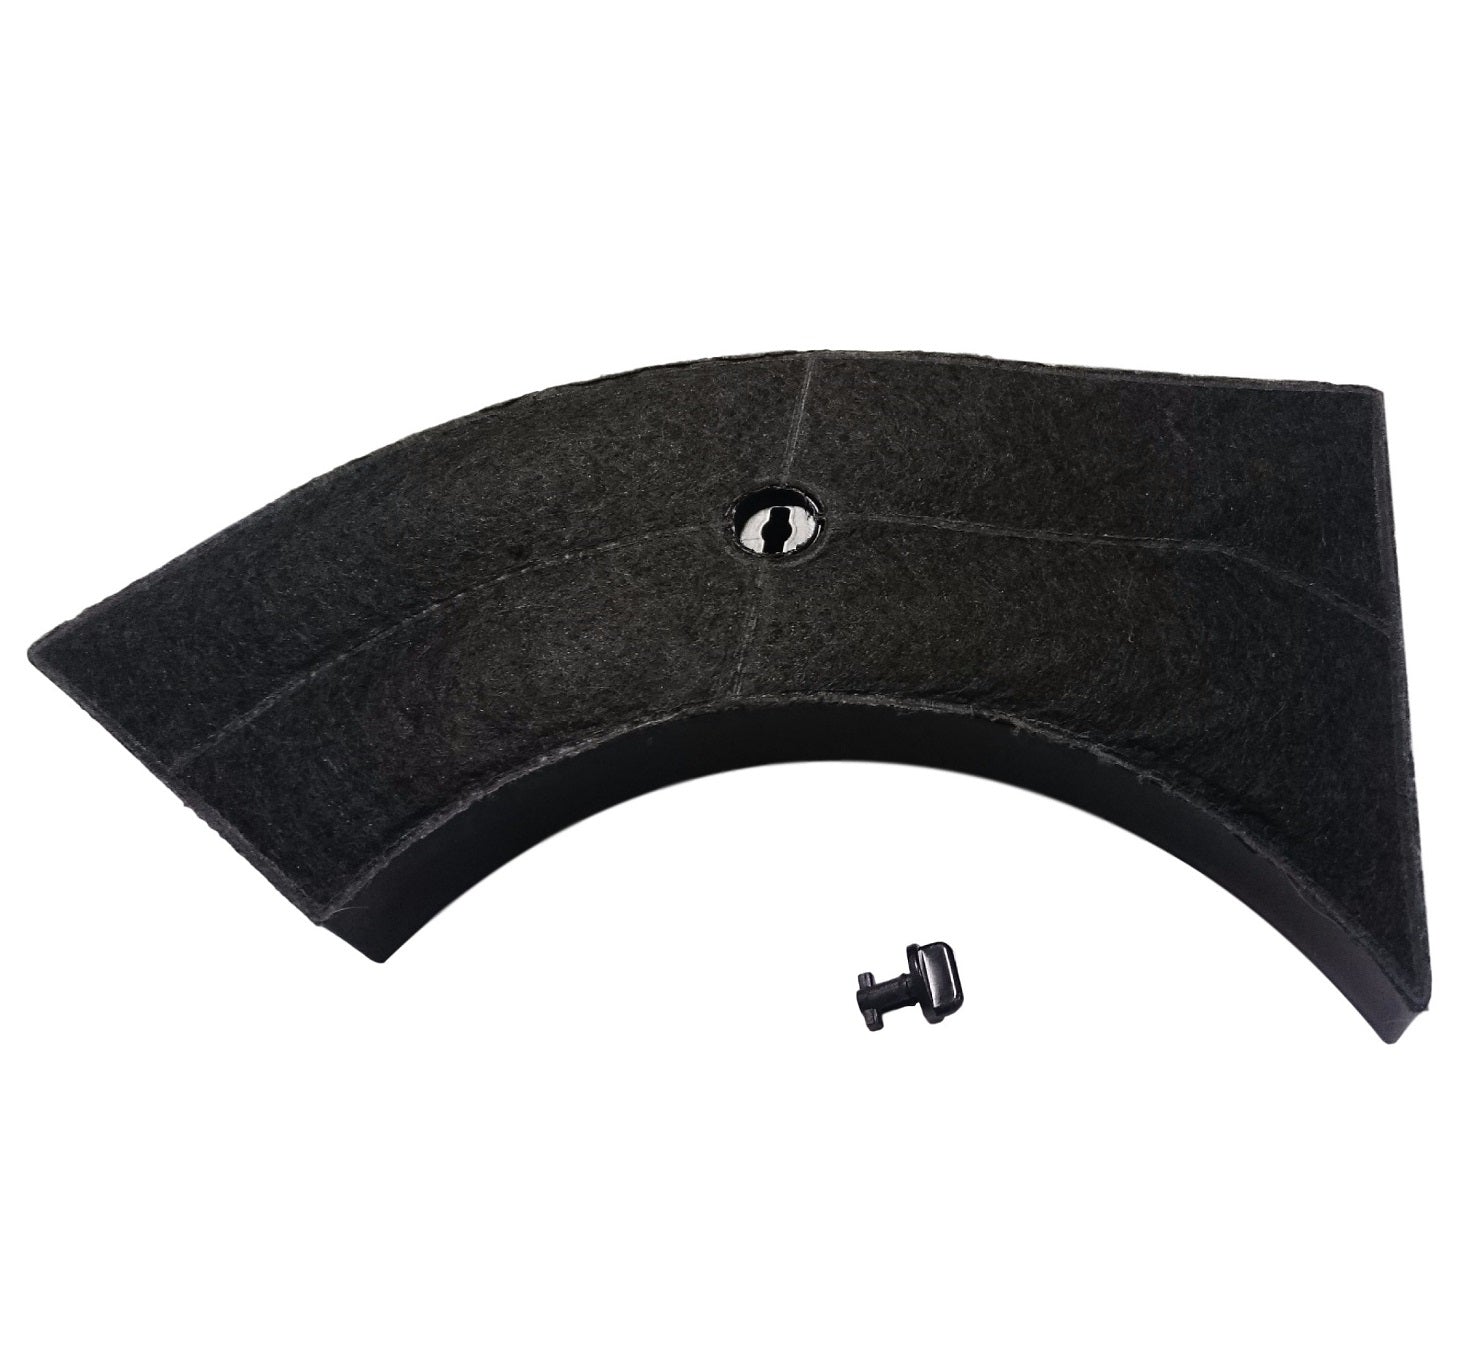 Zanussi 9029793800 Cooker Hood Carbon Filter - Type 10 Charcoal Filters